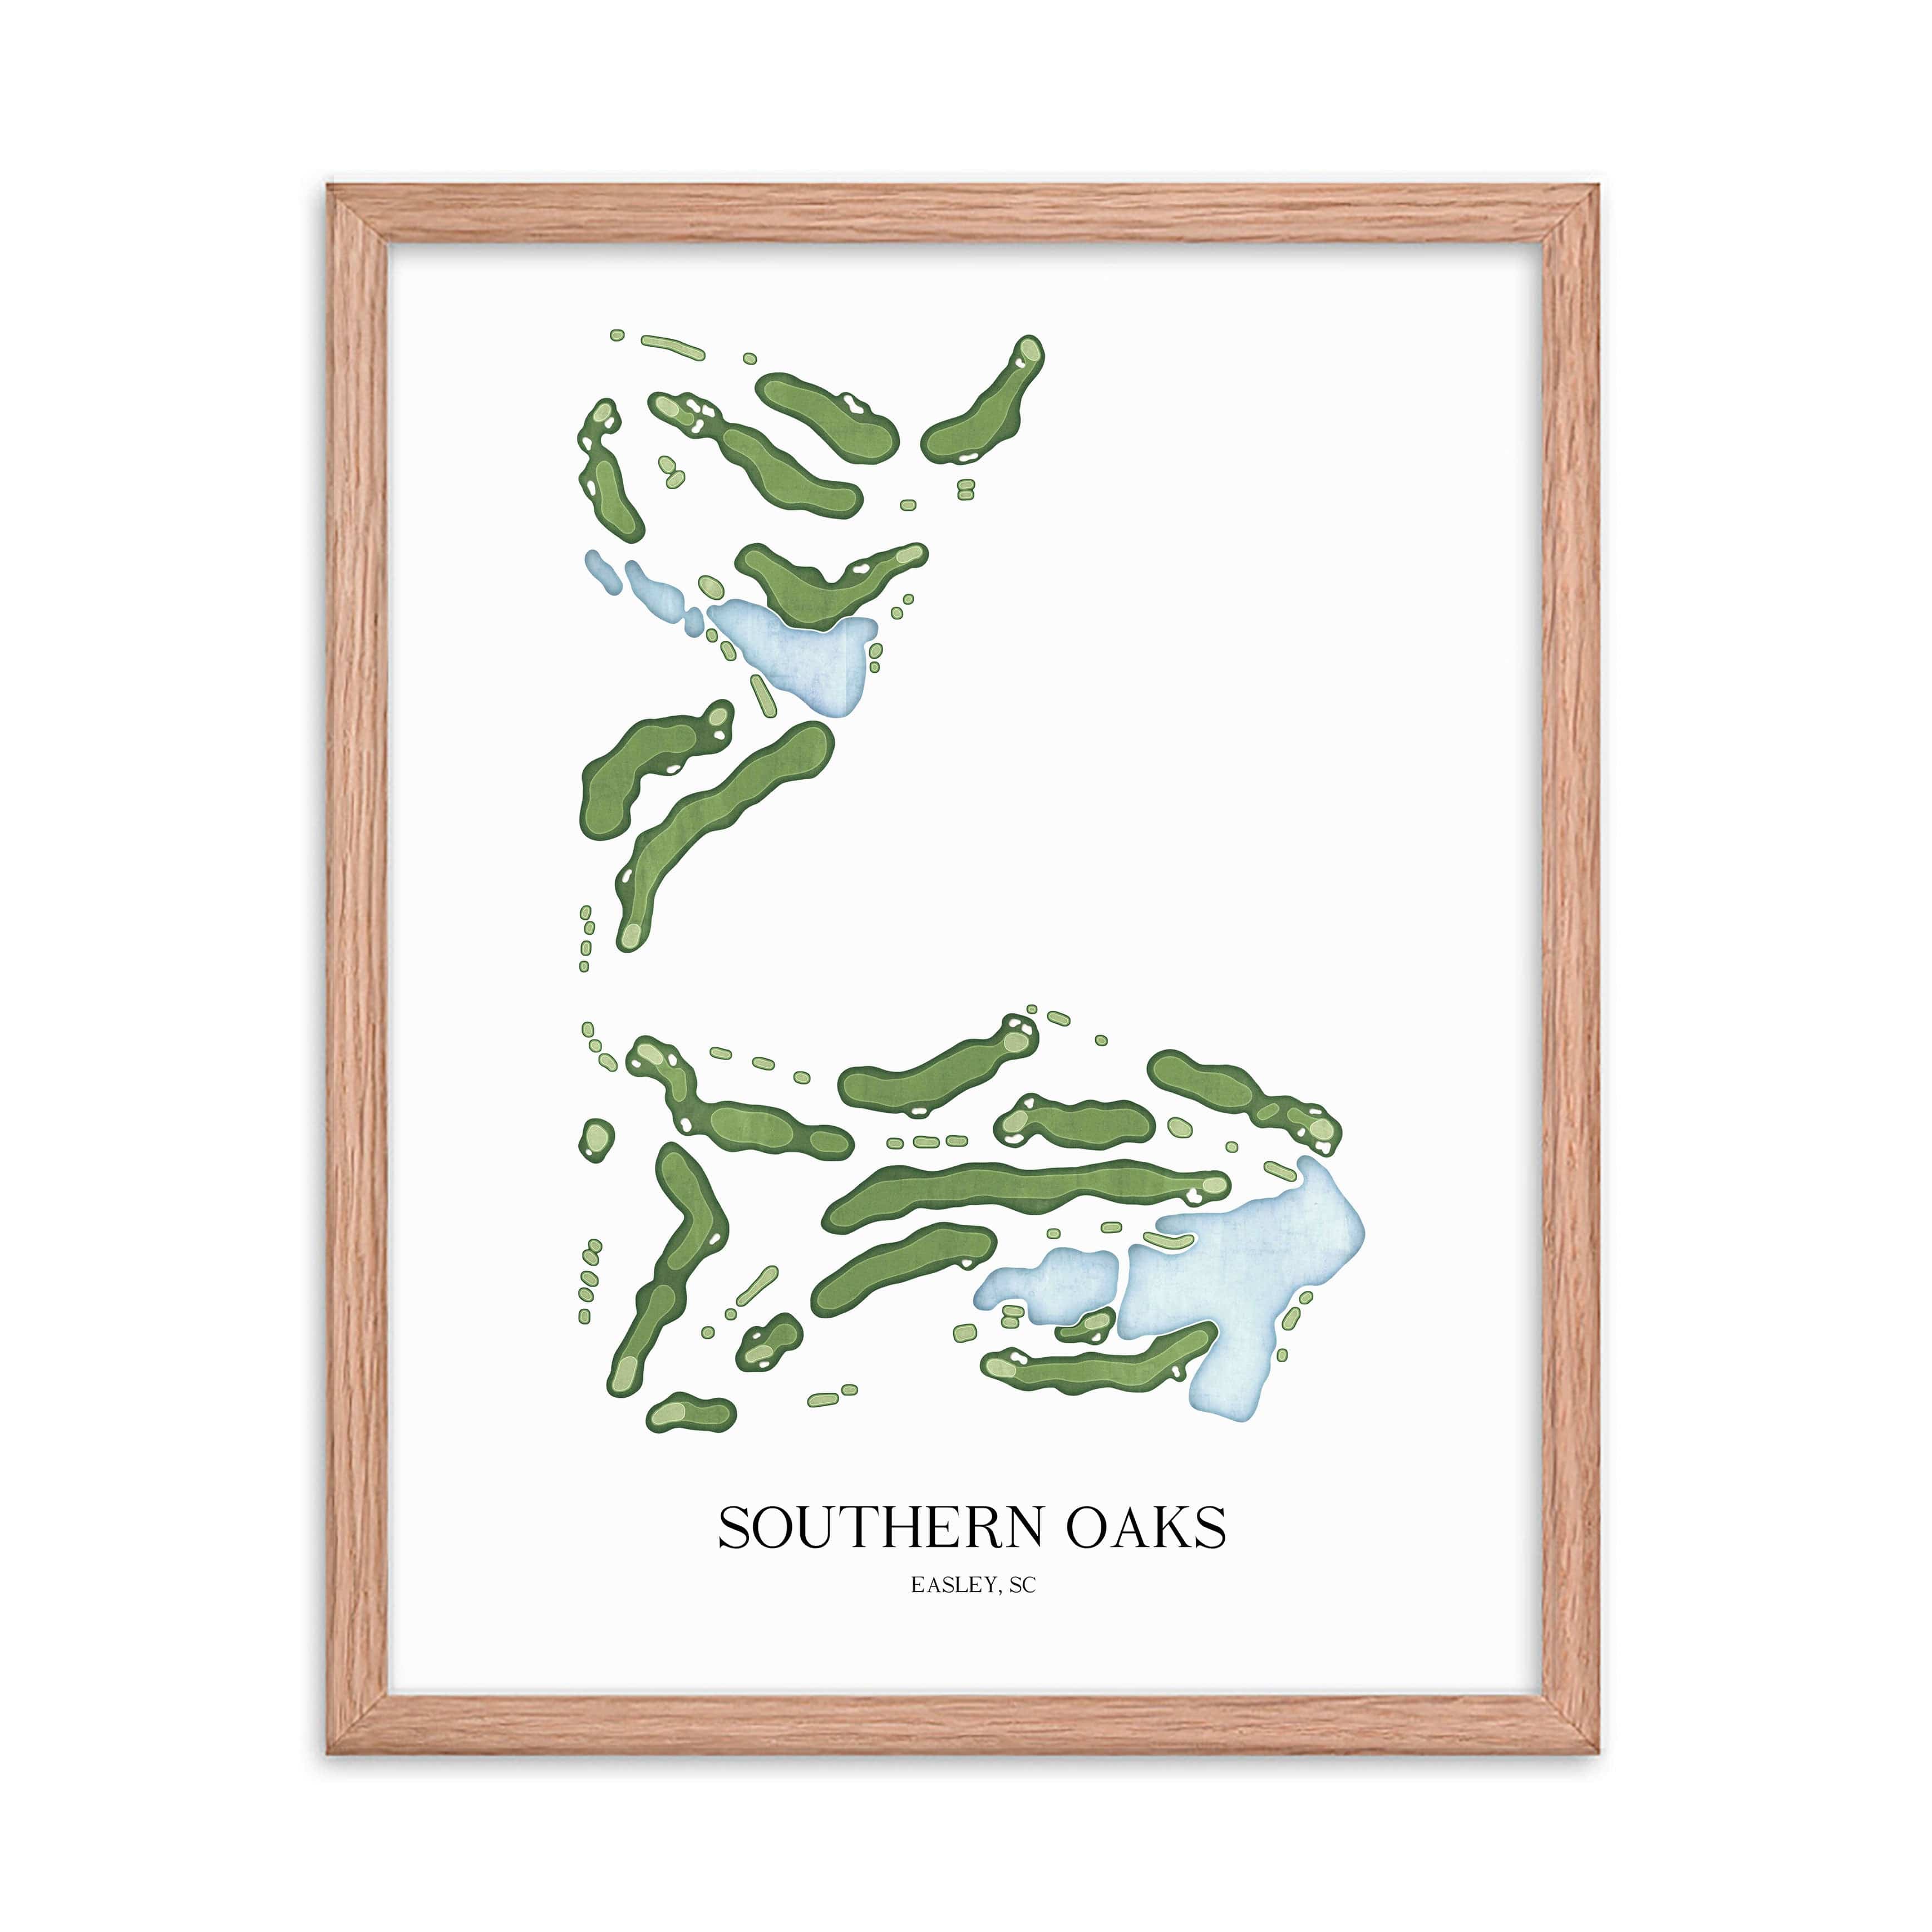 The 19th Hole Golf Shop - Golf Course Prints -  Southern Oaks Golf Course Map